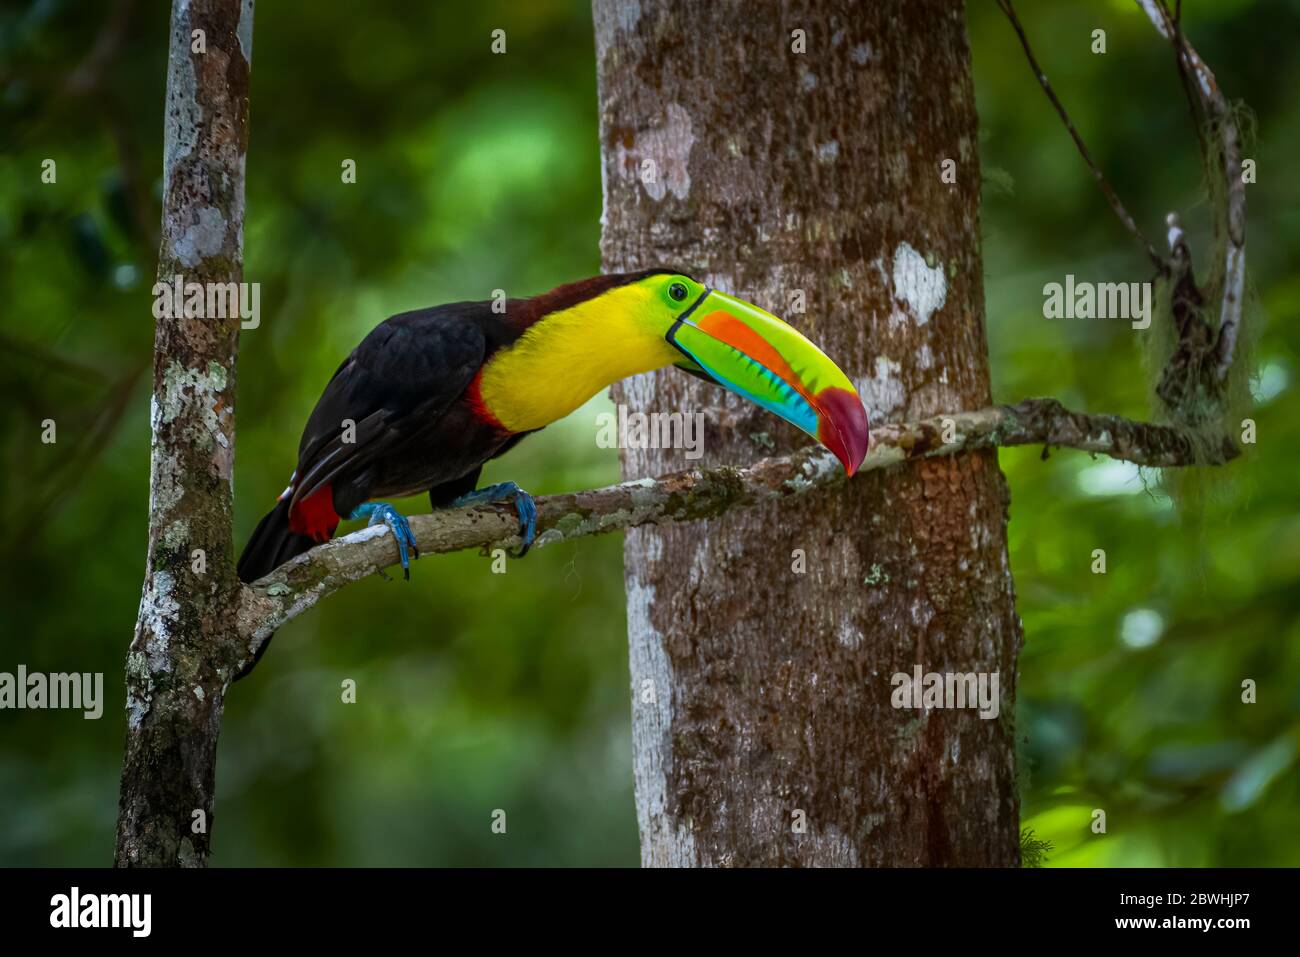 Keel-billed toucan (Ramphastos sulfuratus), also known as sulfur-breasted toucan or rainbow-billed toucan Stock Photo